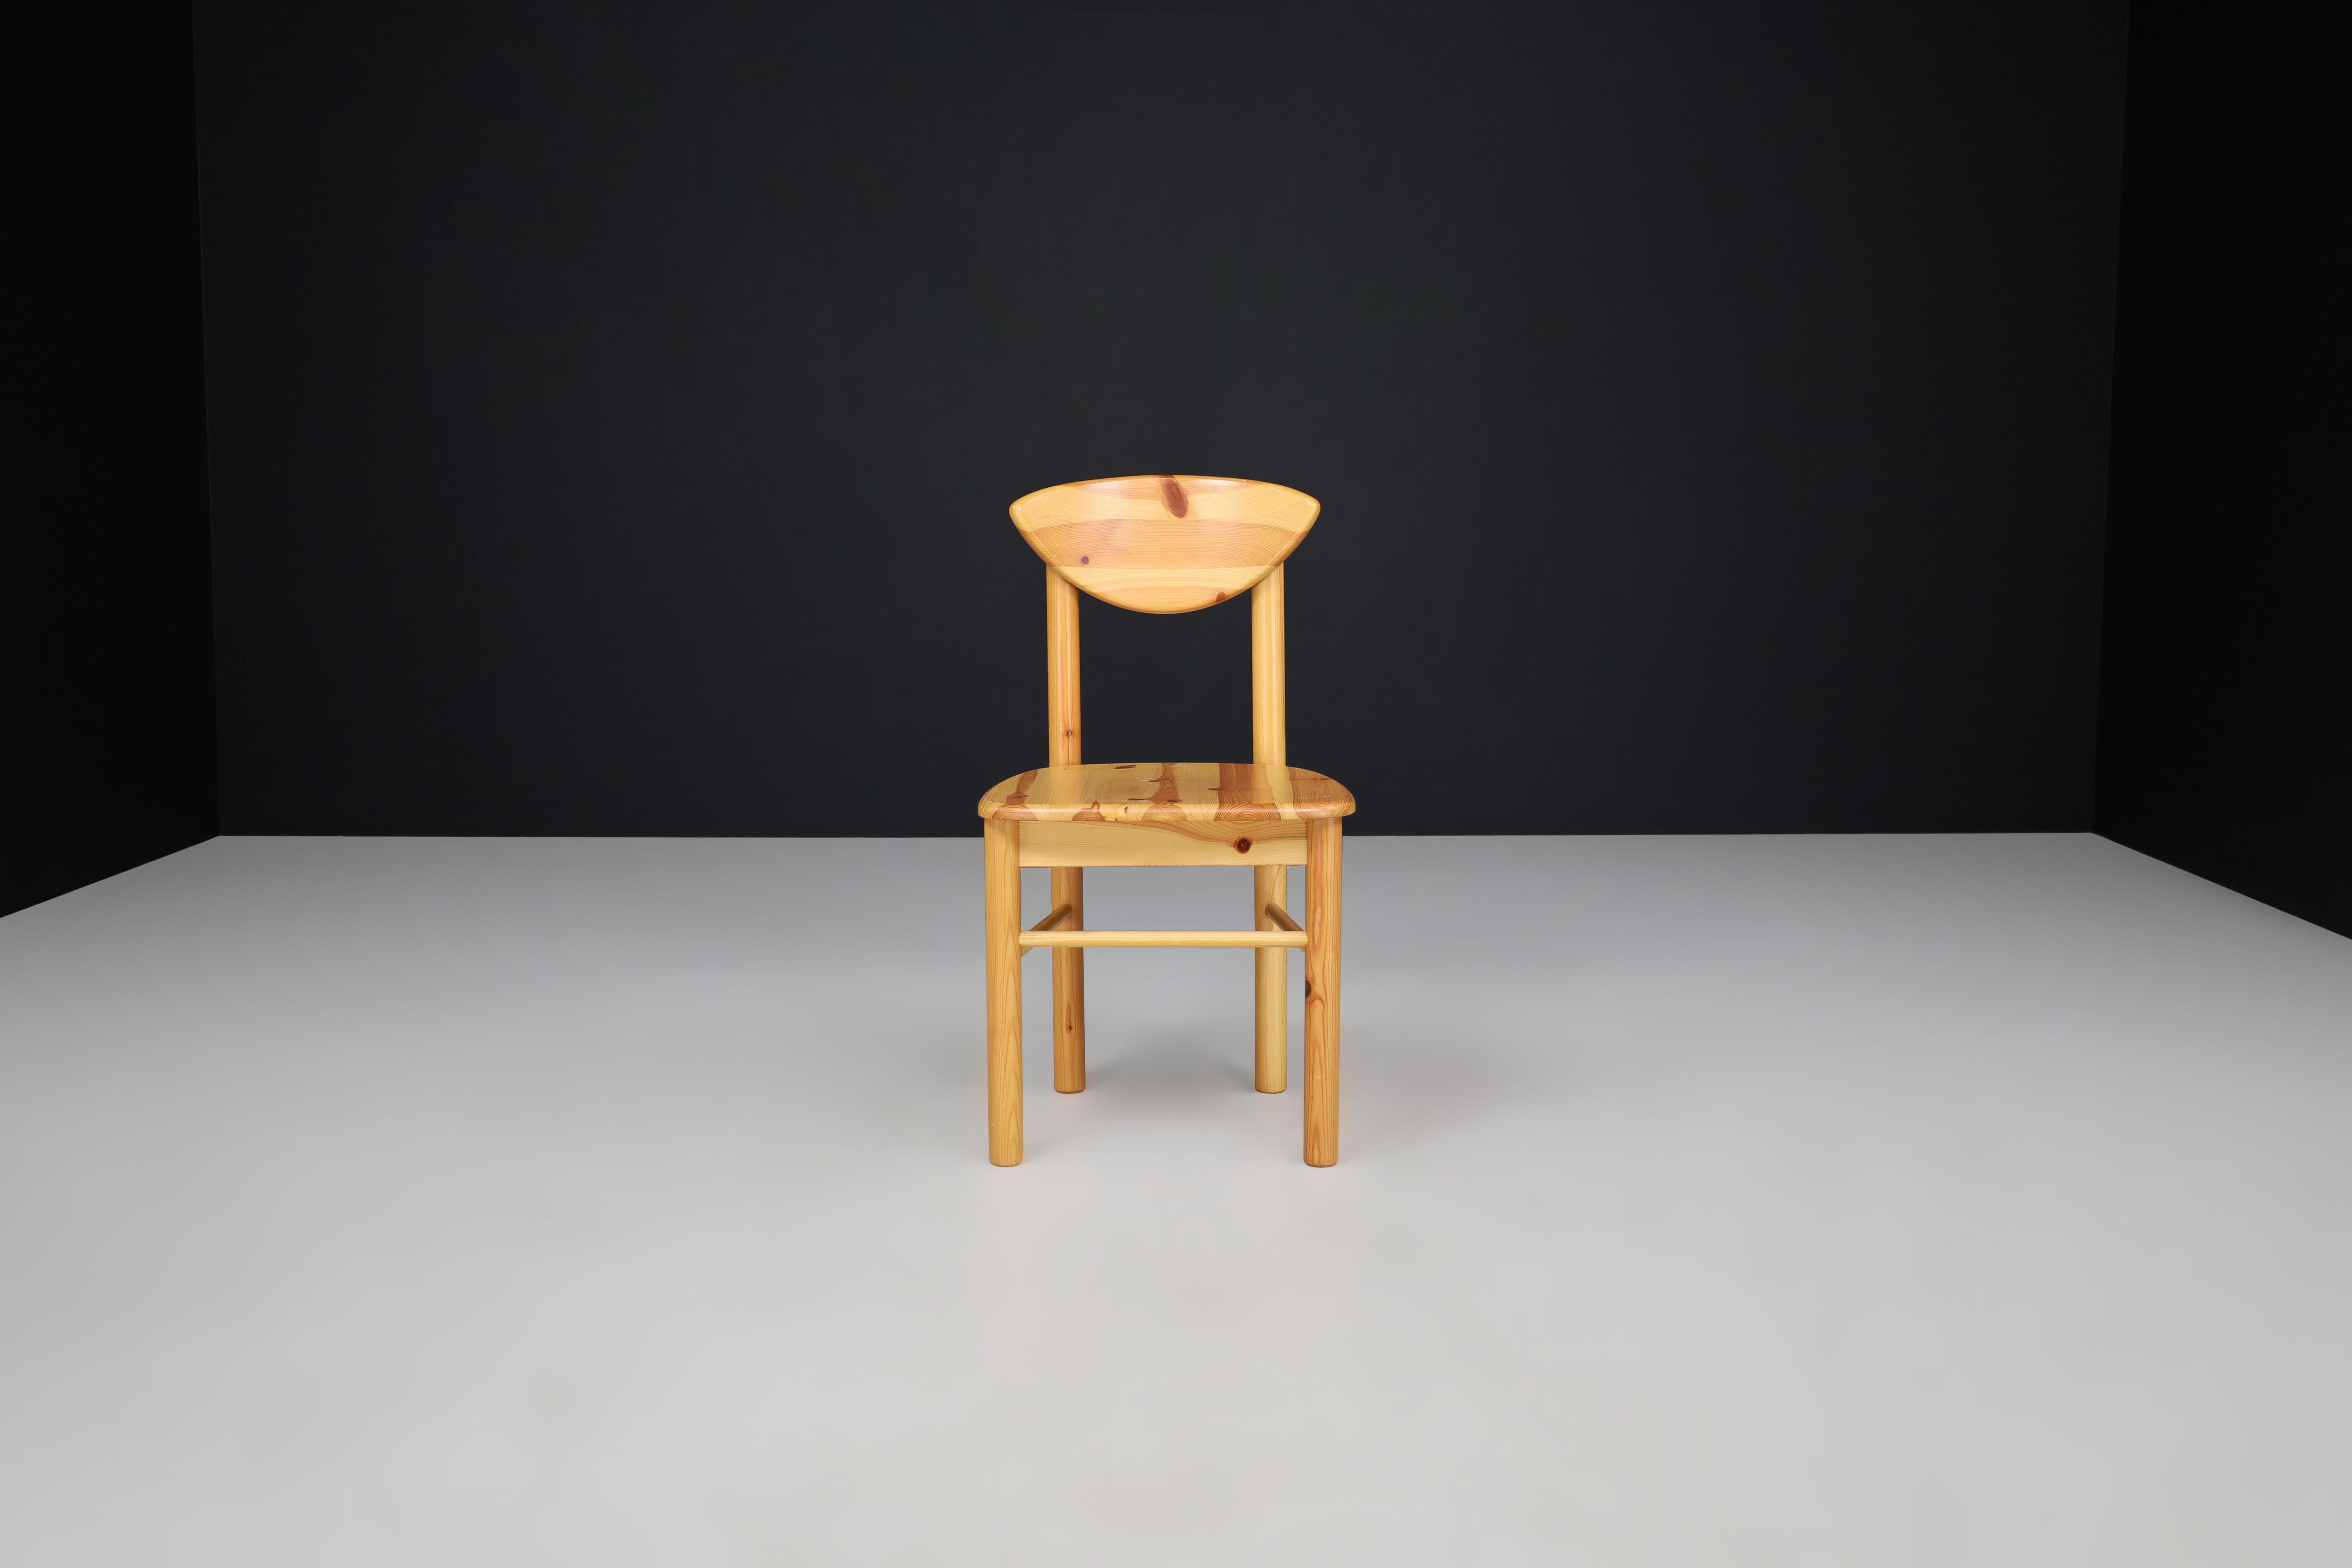 Scandinavian Modern Rainer Daumiller Dining Room Chairs in Pine, Denmark 1970s 

We have a beautiful set of 30 dining room chairs designed by Rainer Daumiller for Hirtshals Savvaerk in Denmark during the 1970s. The chairs are made of solid pine,